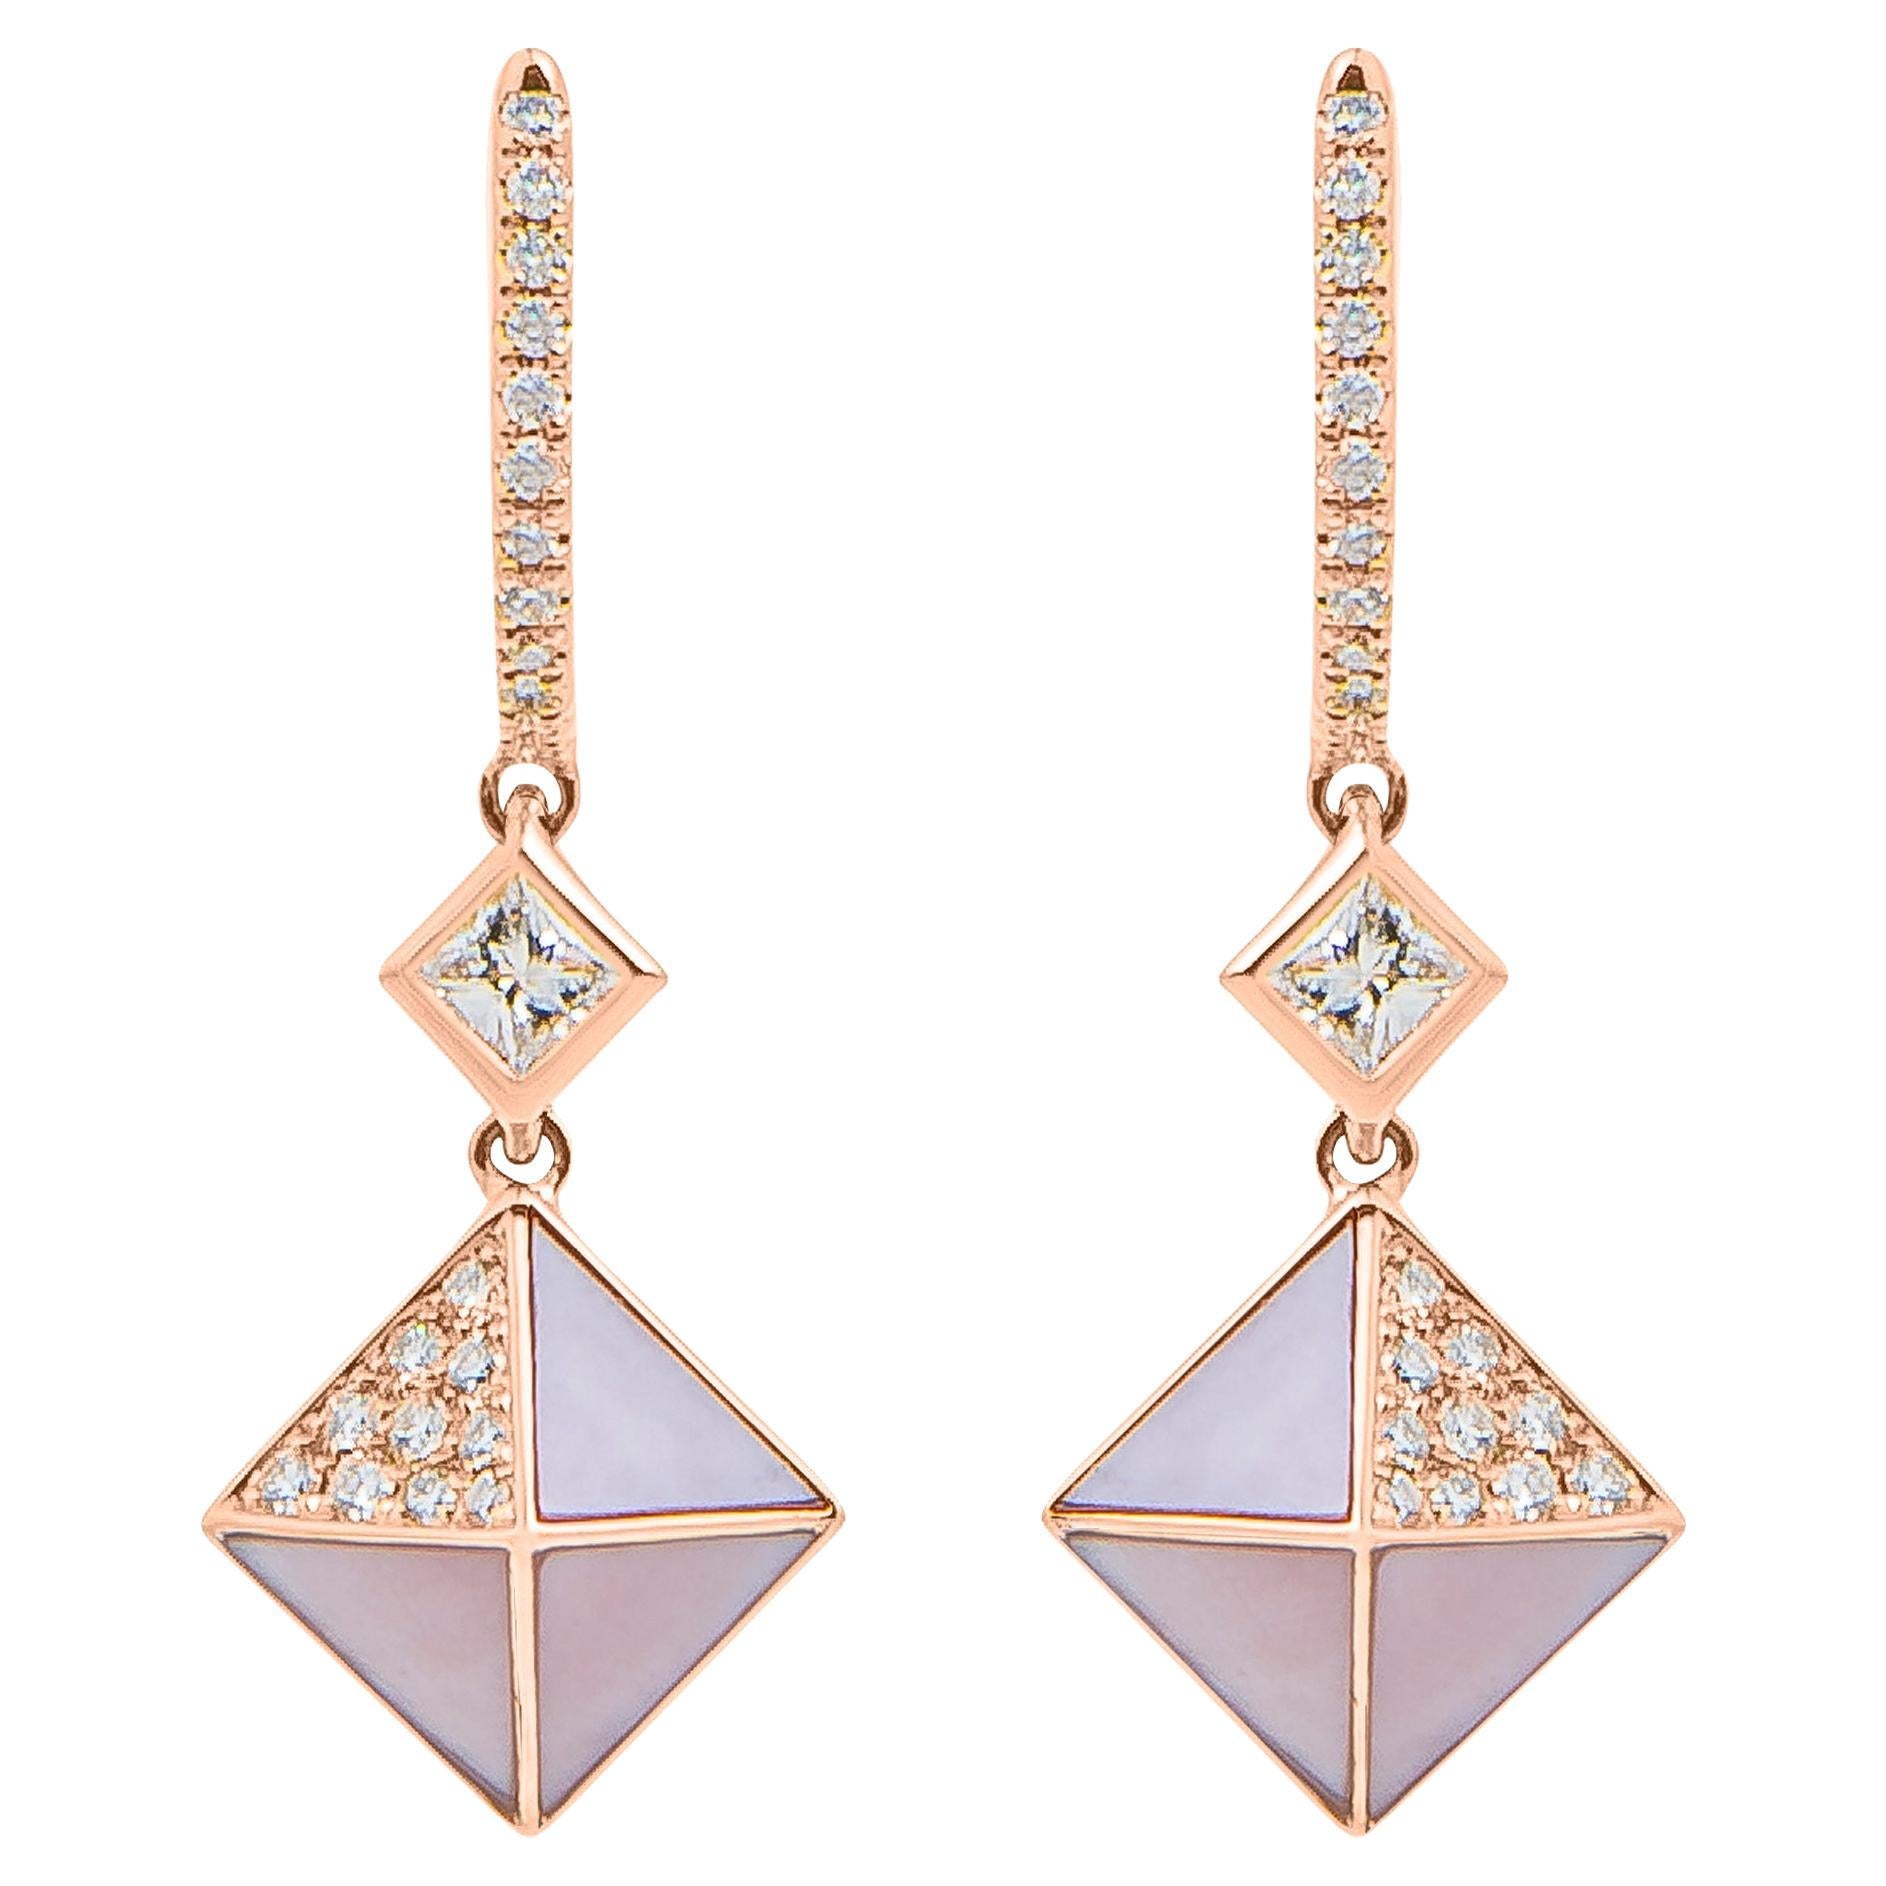 Tetra Apex Earrings with Pink Mother of Pearl and Diamonds in 18k Rose Gold